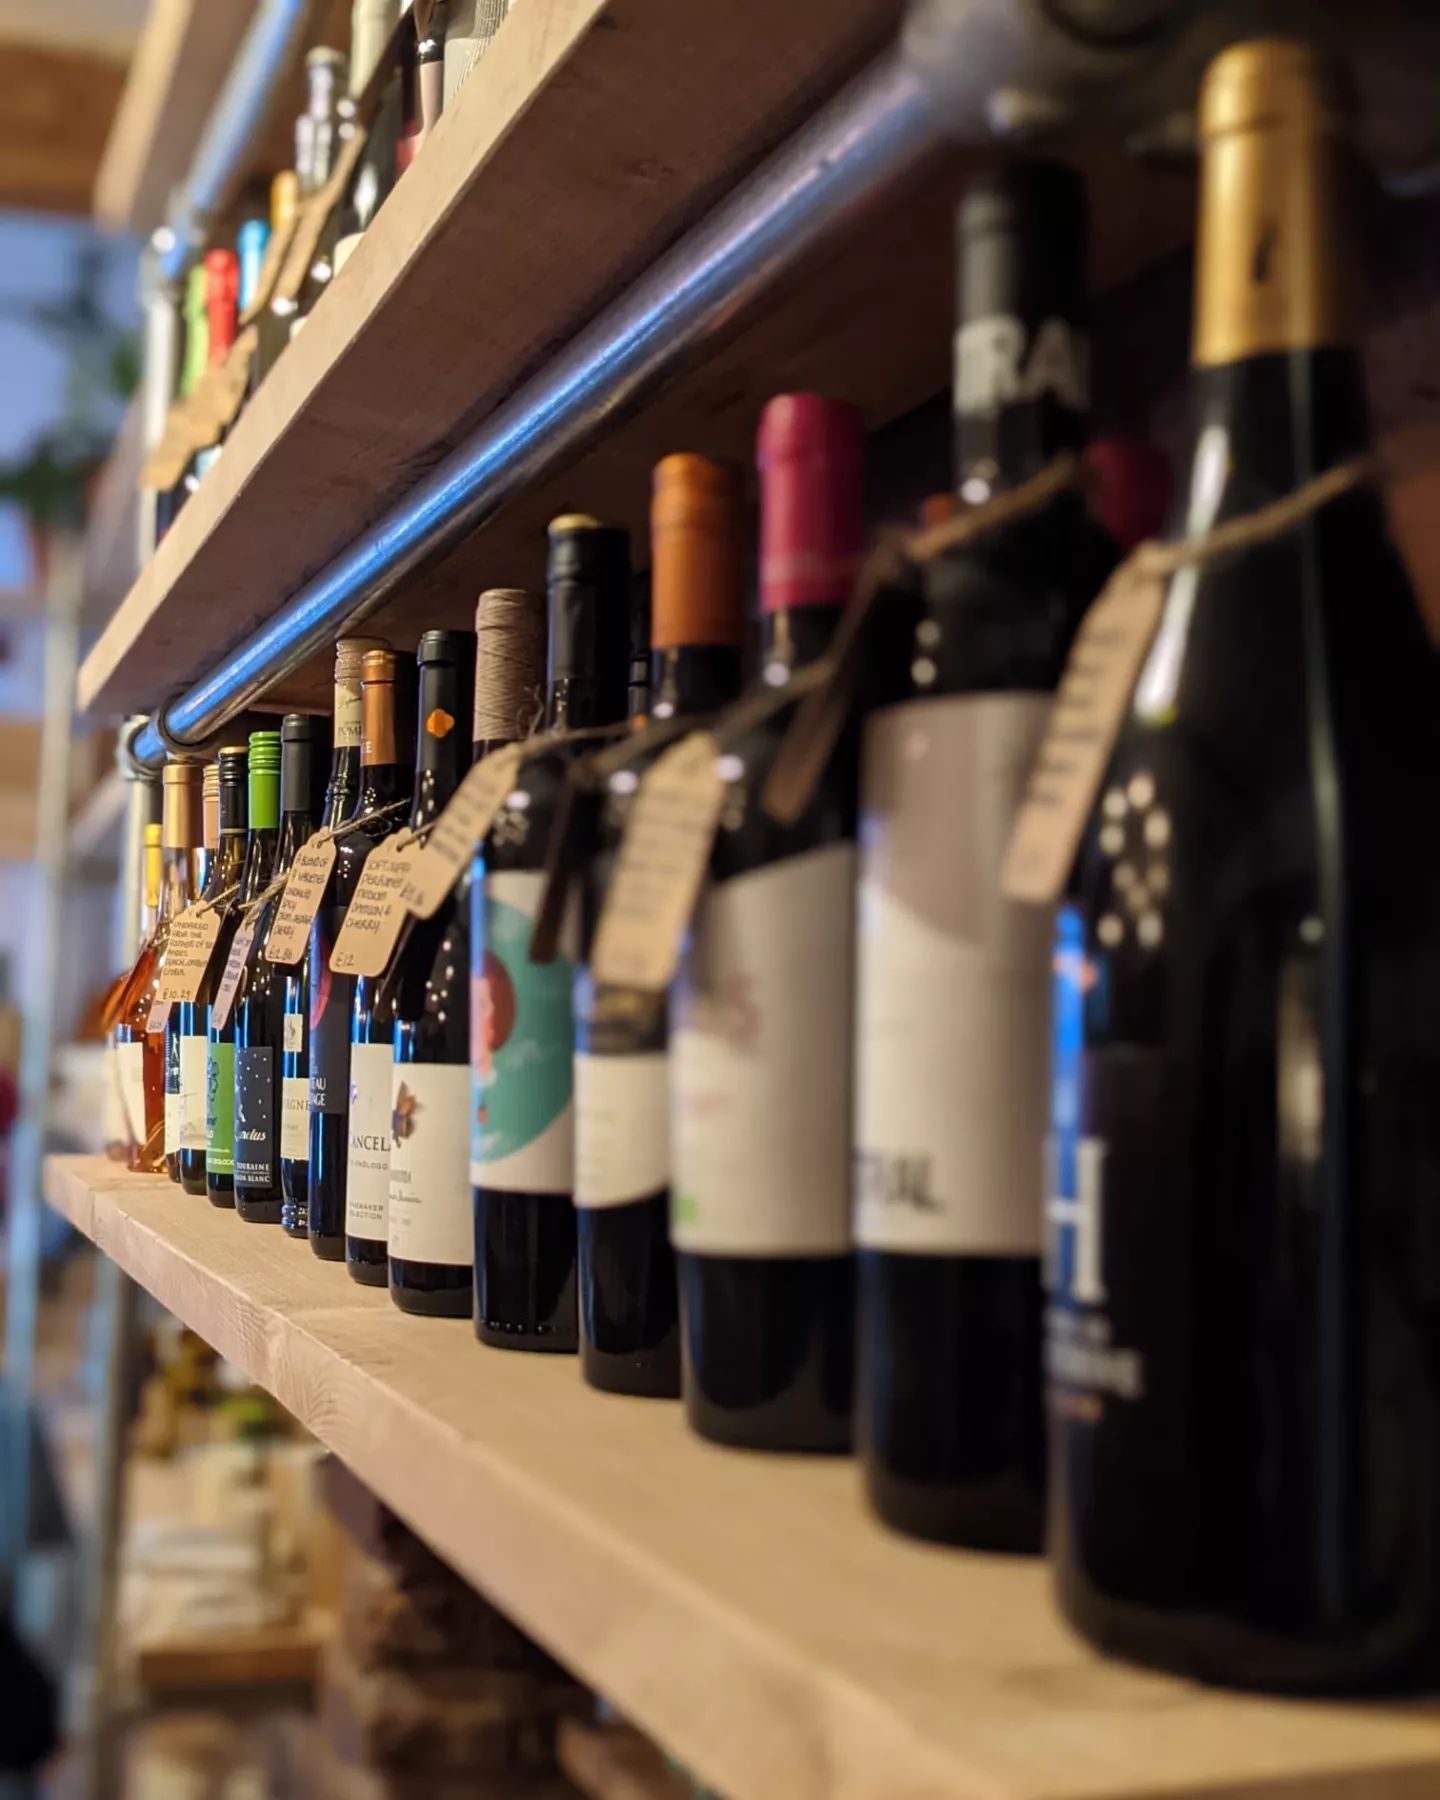 Wine from independent sellers, craft beer from local manchester breweries and spirits from Manchester distilleries. Draft beer, house wine and drinks available to sit in and enjoy